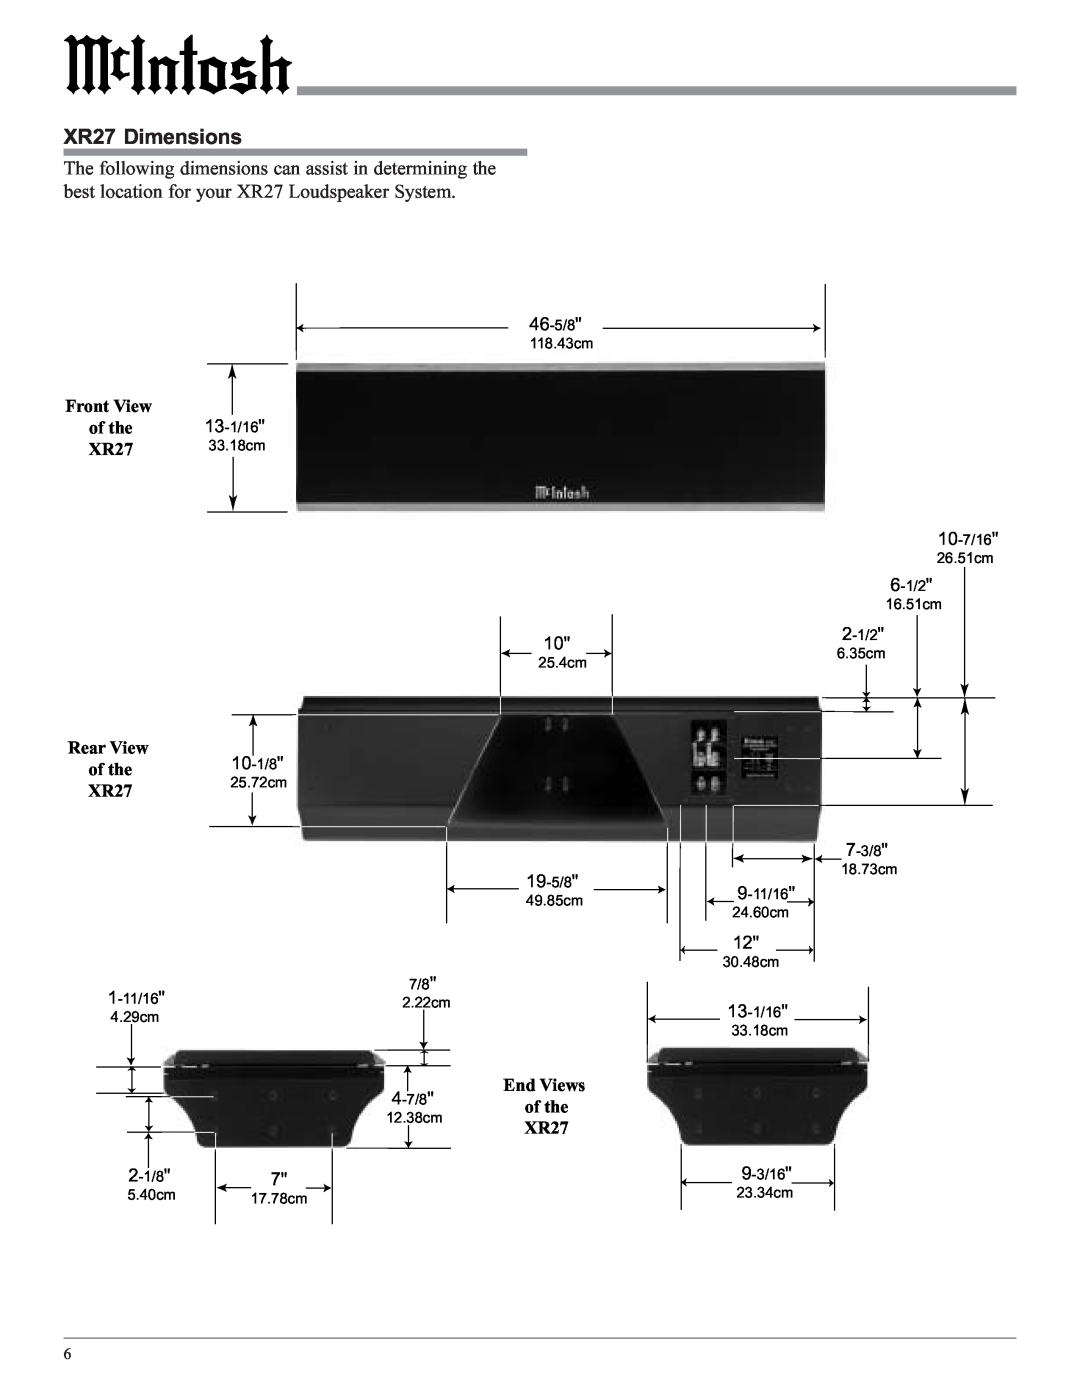 McIntosh owner manual XR27 Dimensions, Front View, Rear View of the10-1/8, End Views 